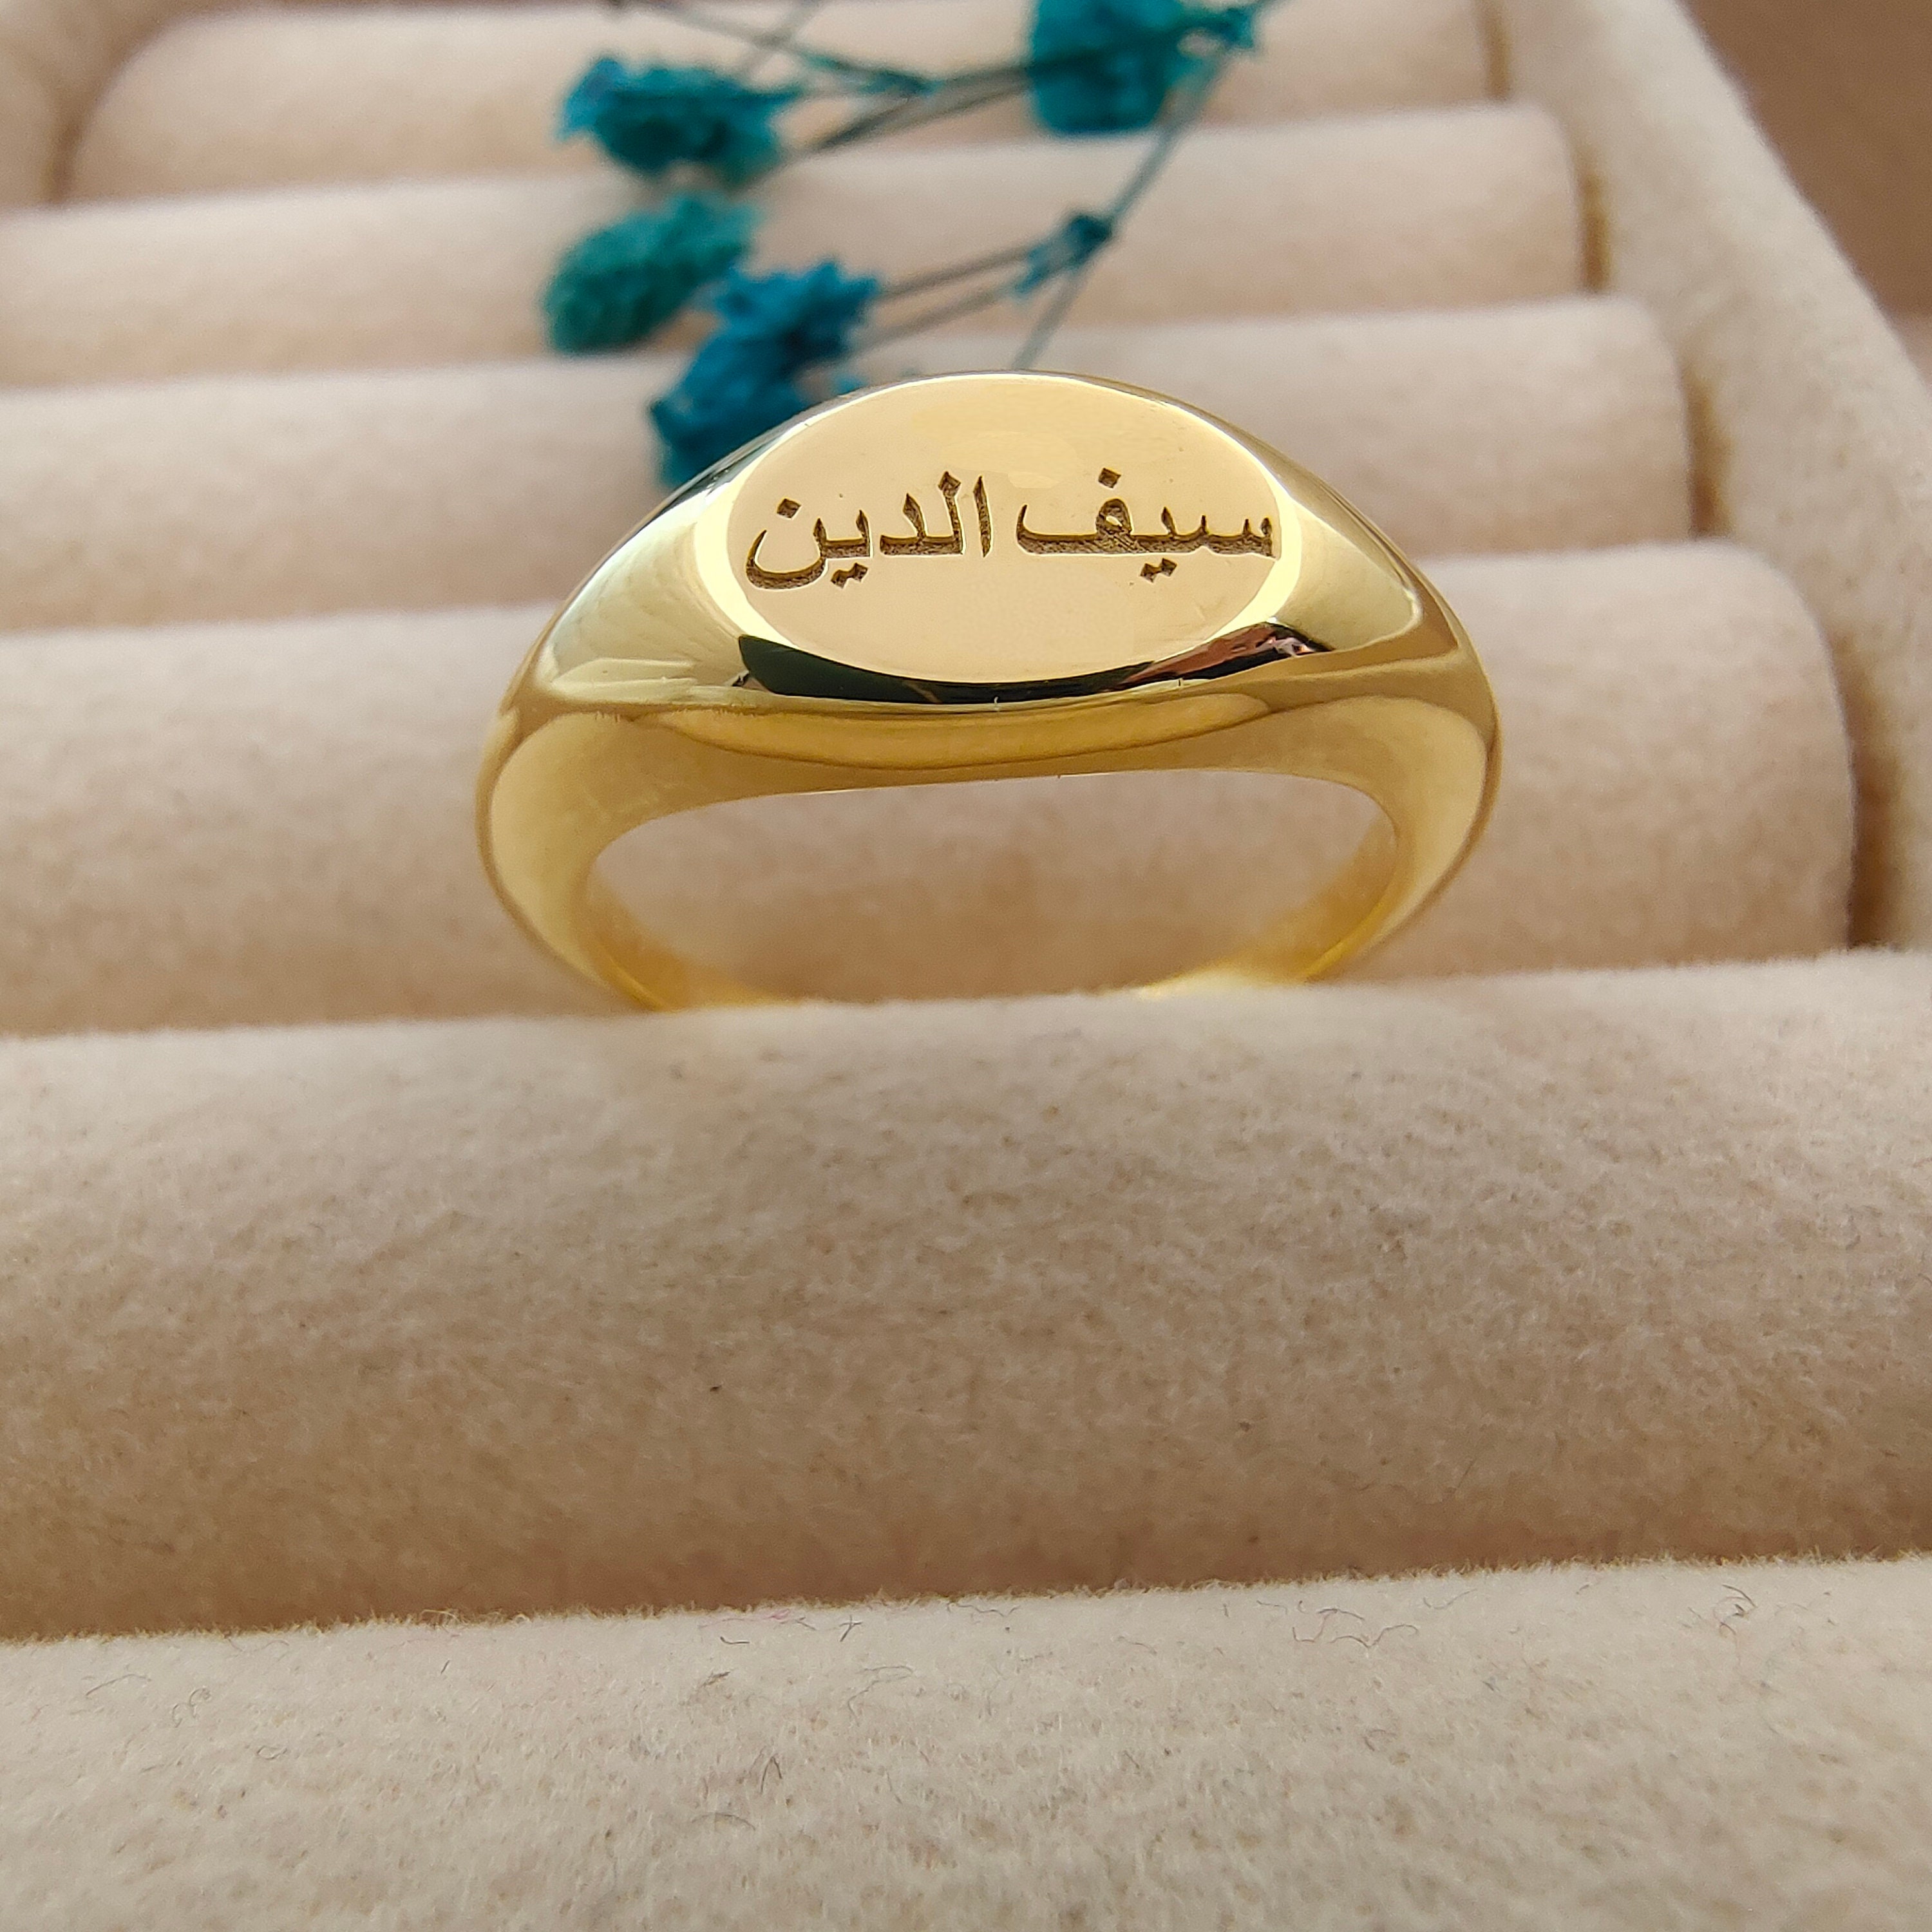 Amazon.com: Gold Name Ring, Personalized name ring, Initial Ring, Custom Name  Ring, Personalized Gold Ring, name jewelry, children name ring, her name :  Handmade Products